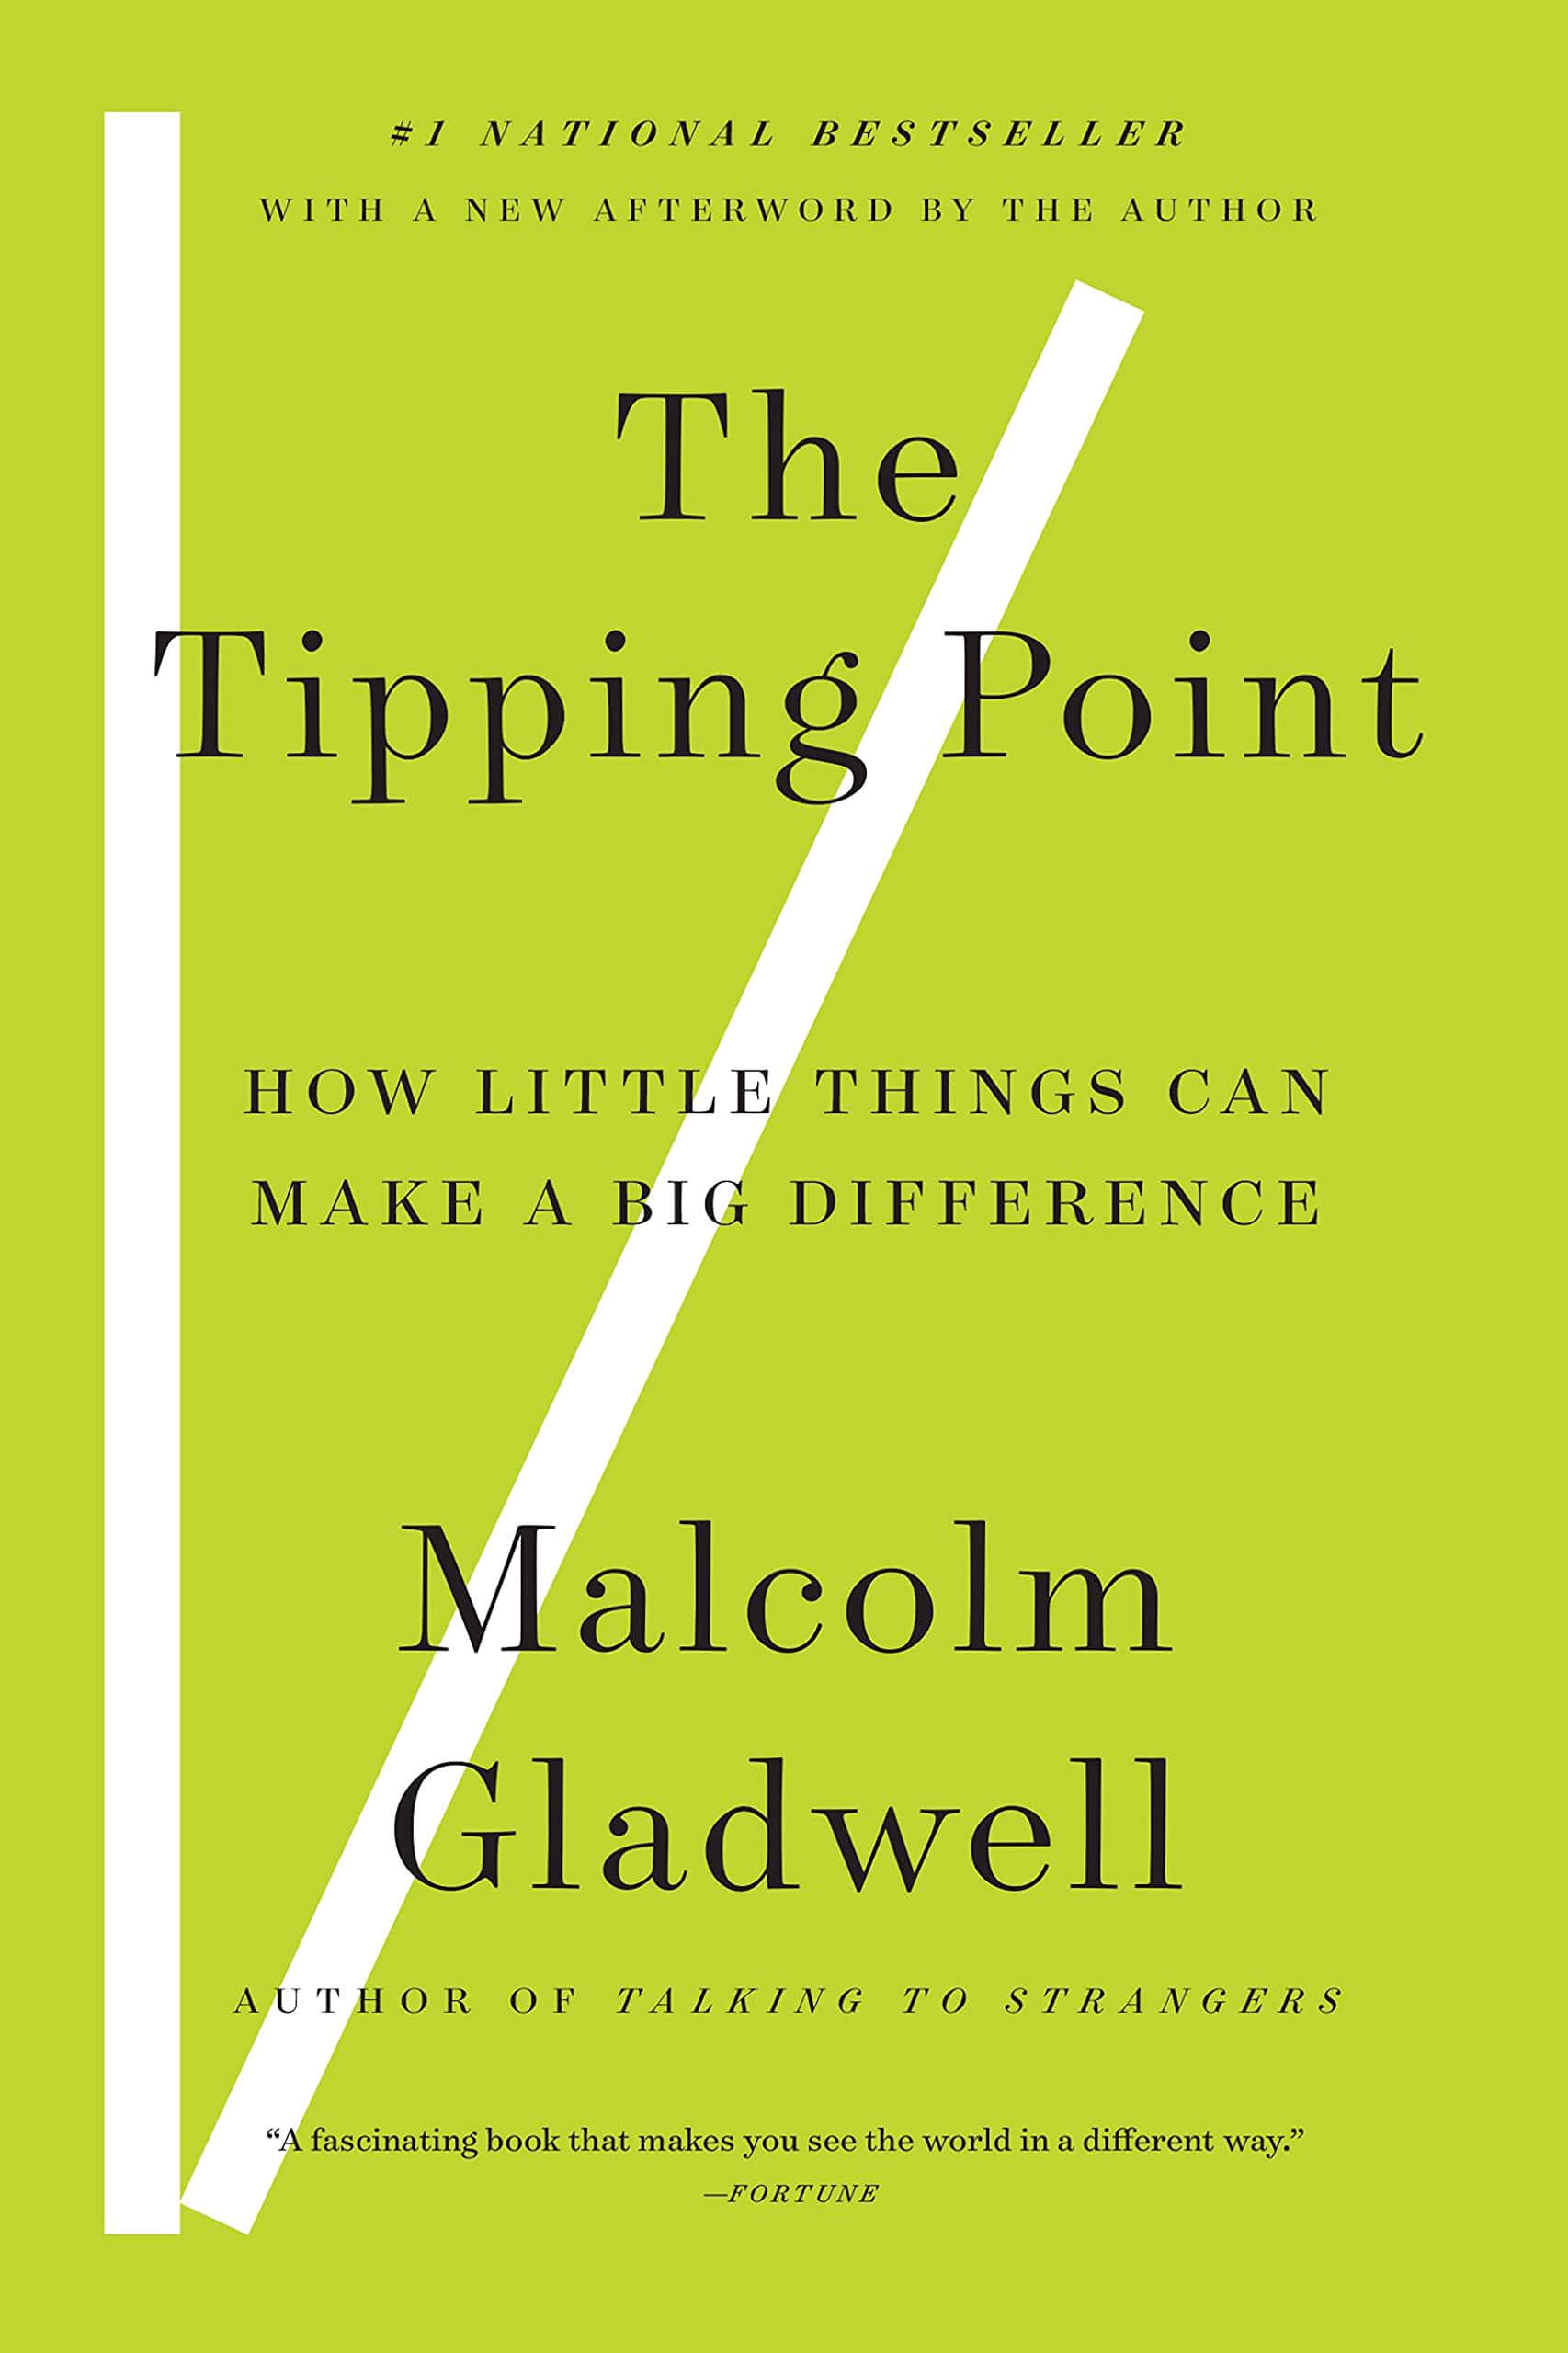 Book cover of Malcolm Gladwell's "The Tipping Point"